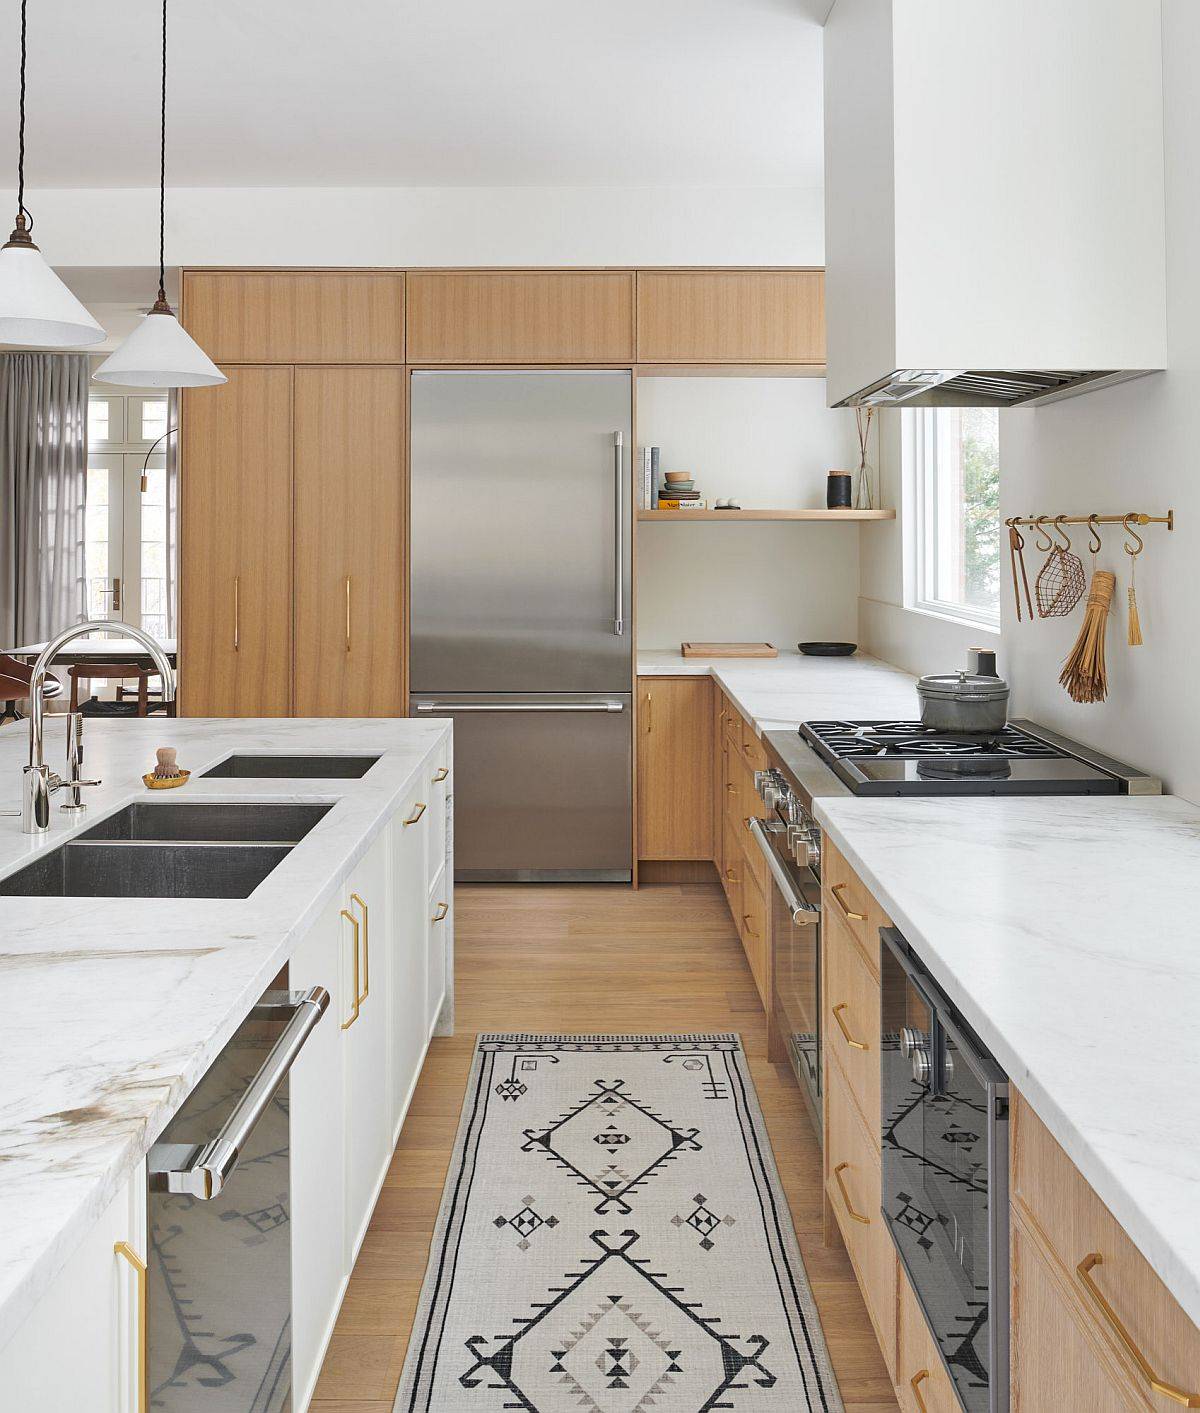 White marble countertops complement the wood cabinets beautifully in this kitchen